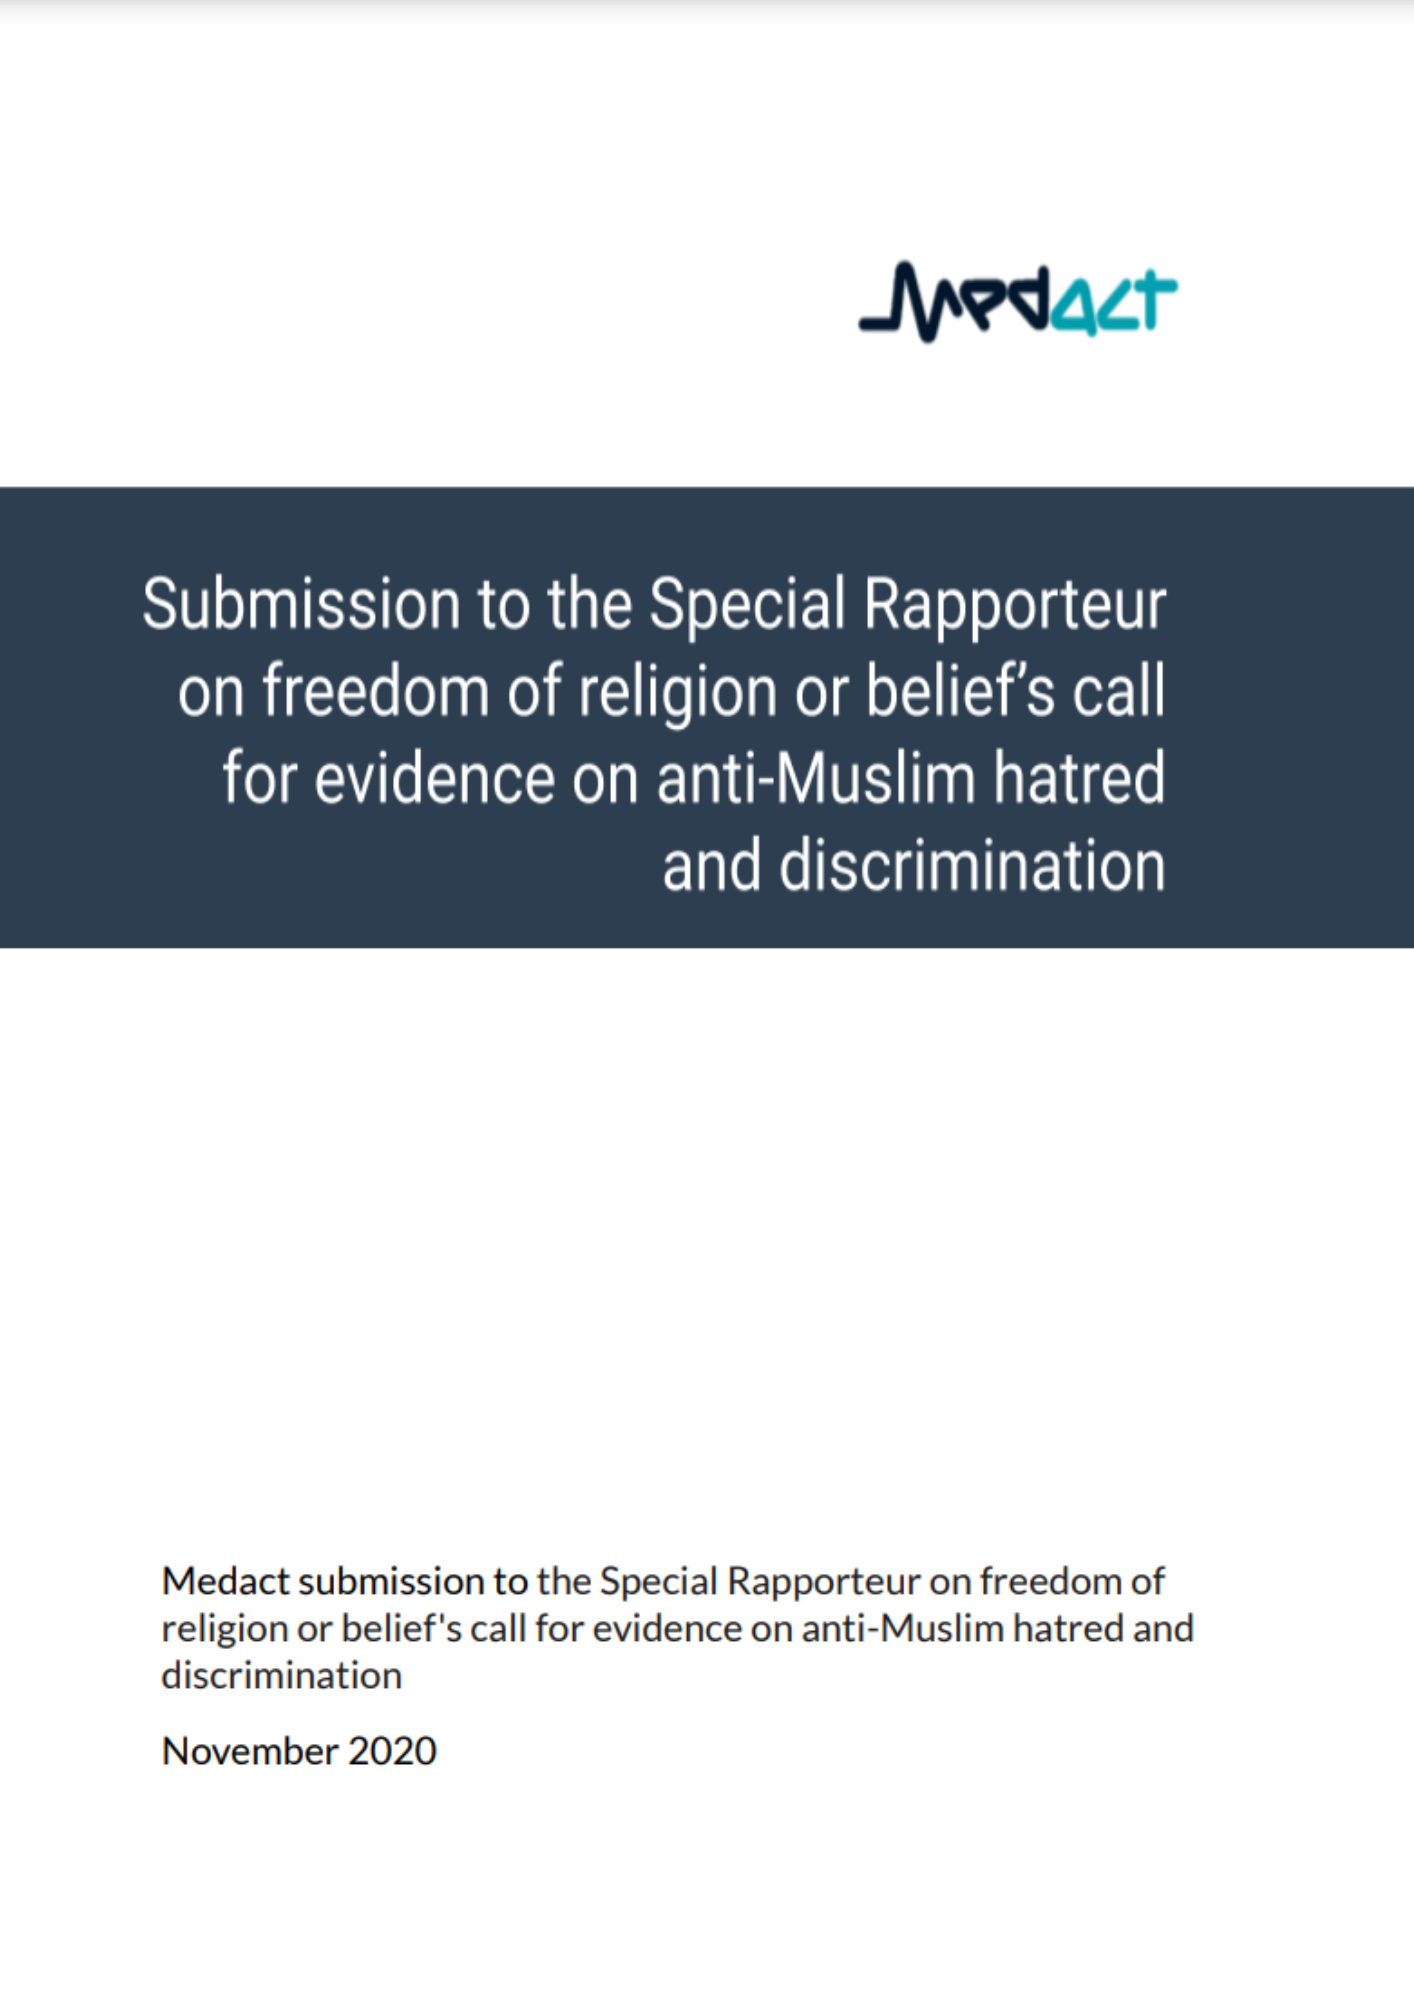 Submission to the Special Rapporteur on freedom of religion or belief’s call for evidence on anti-Muslim hatred and discrimination